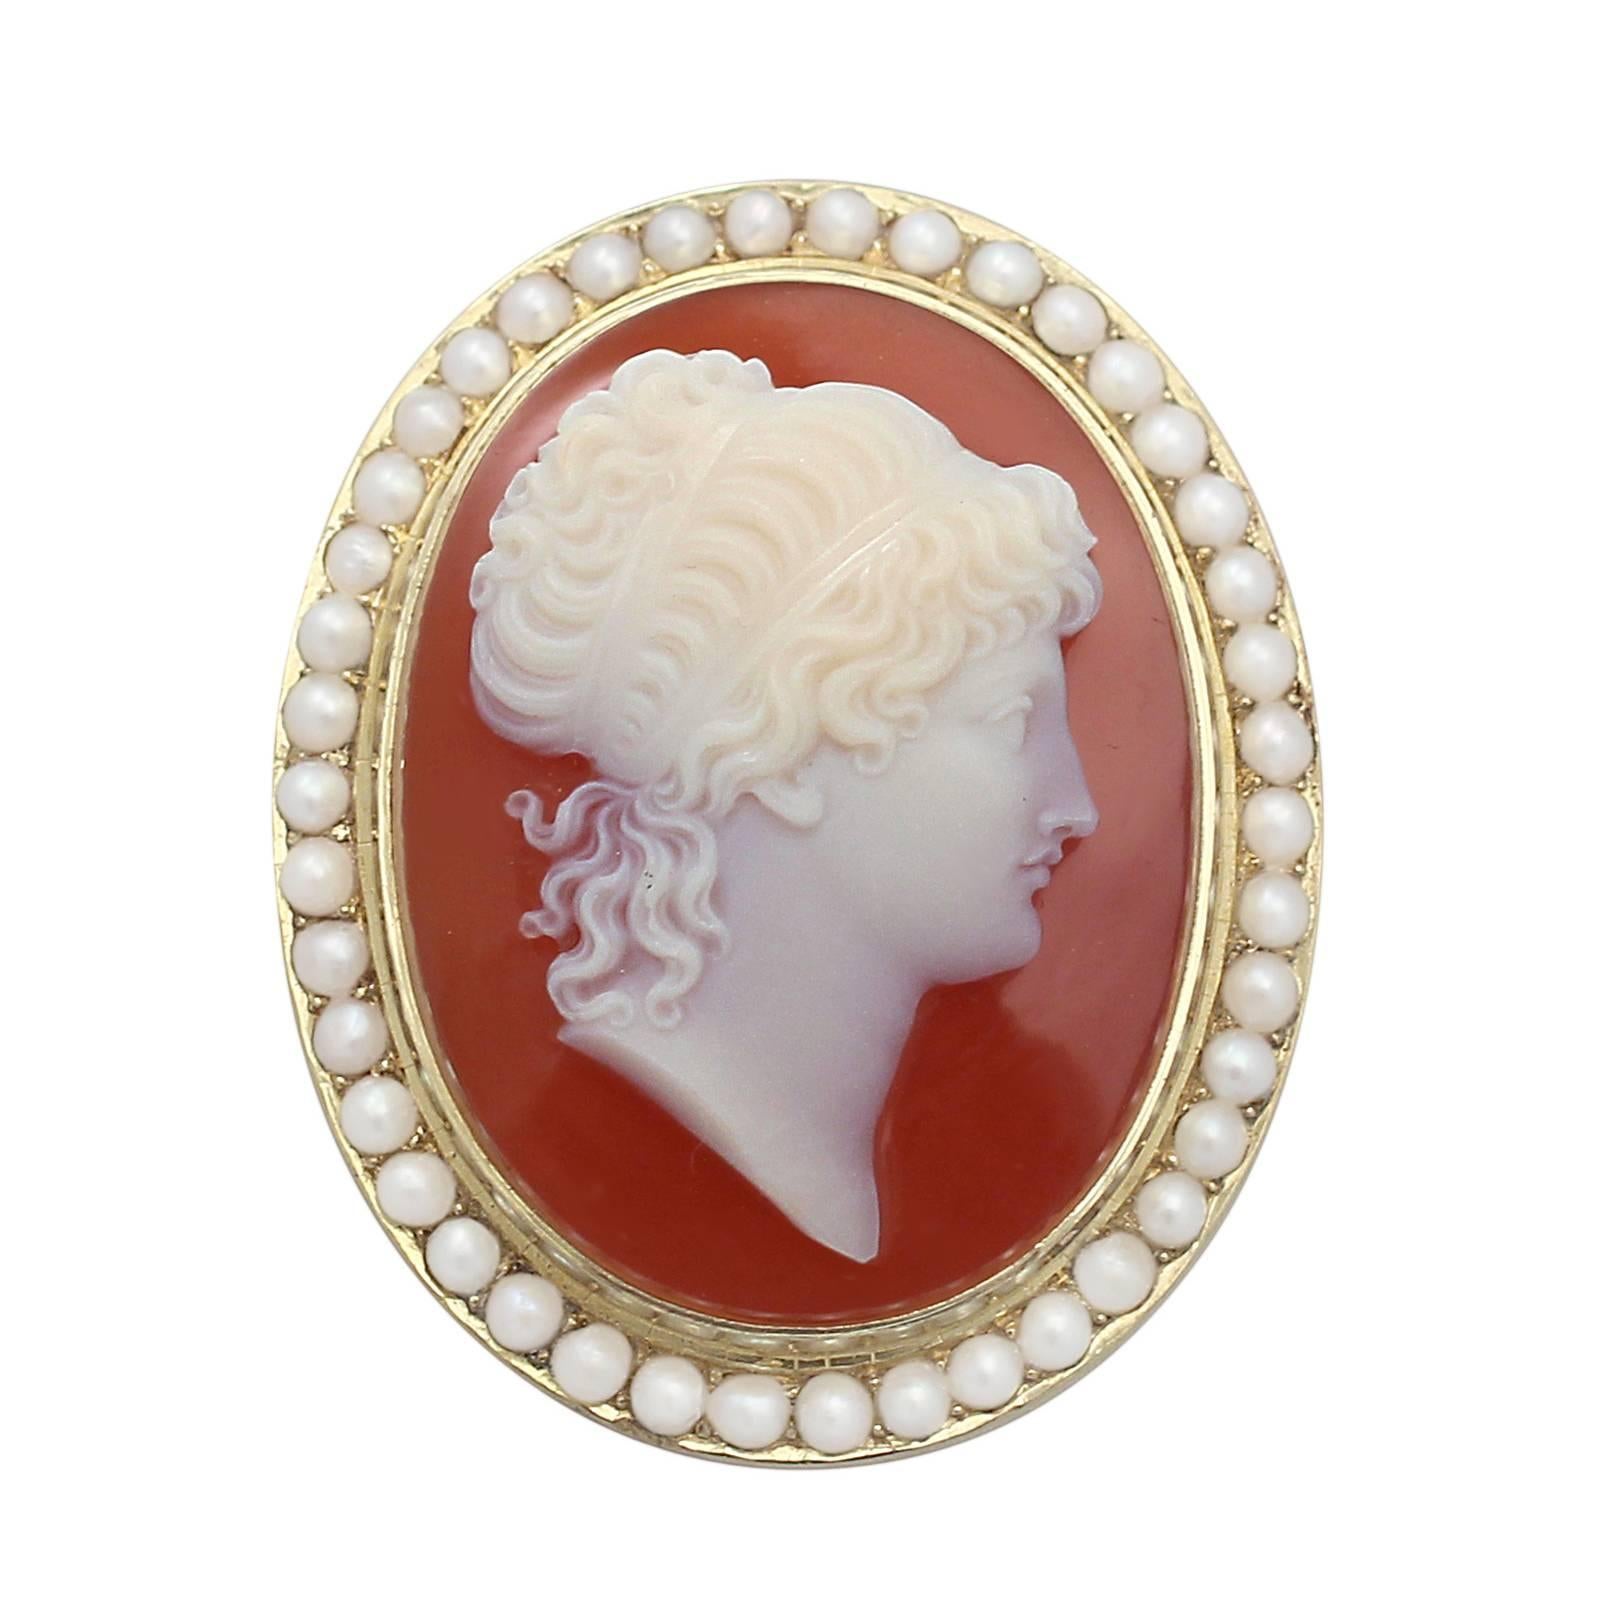 Cameo Brooch with Pearls, 15 Karat Yellow Gold, Antique Victorian